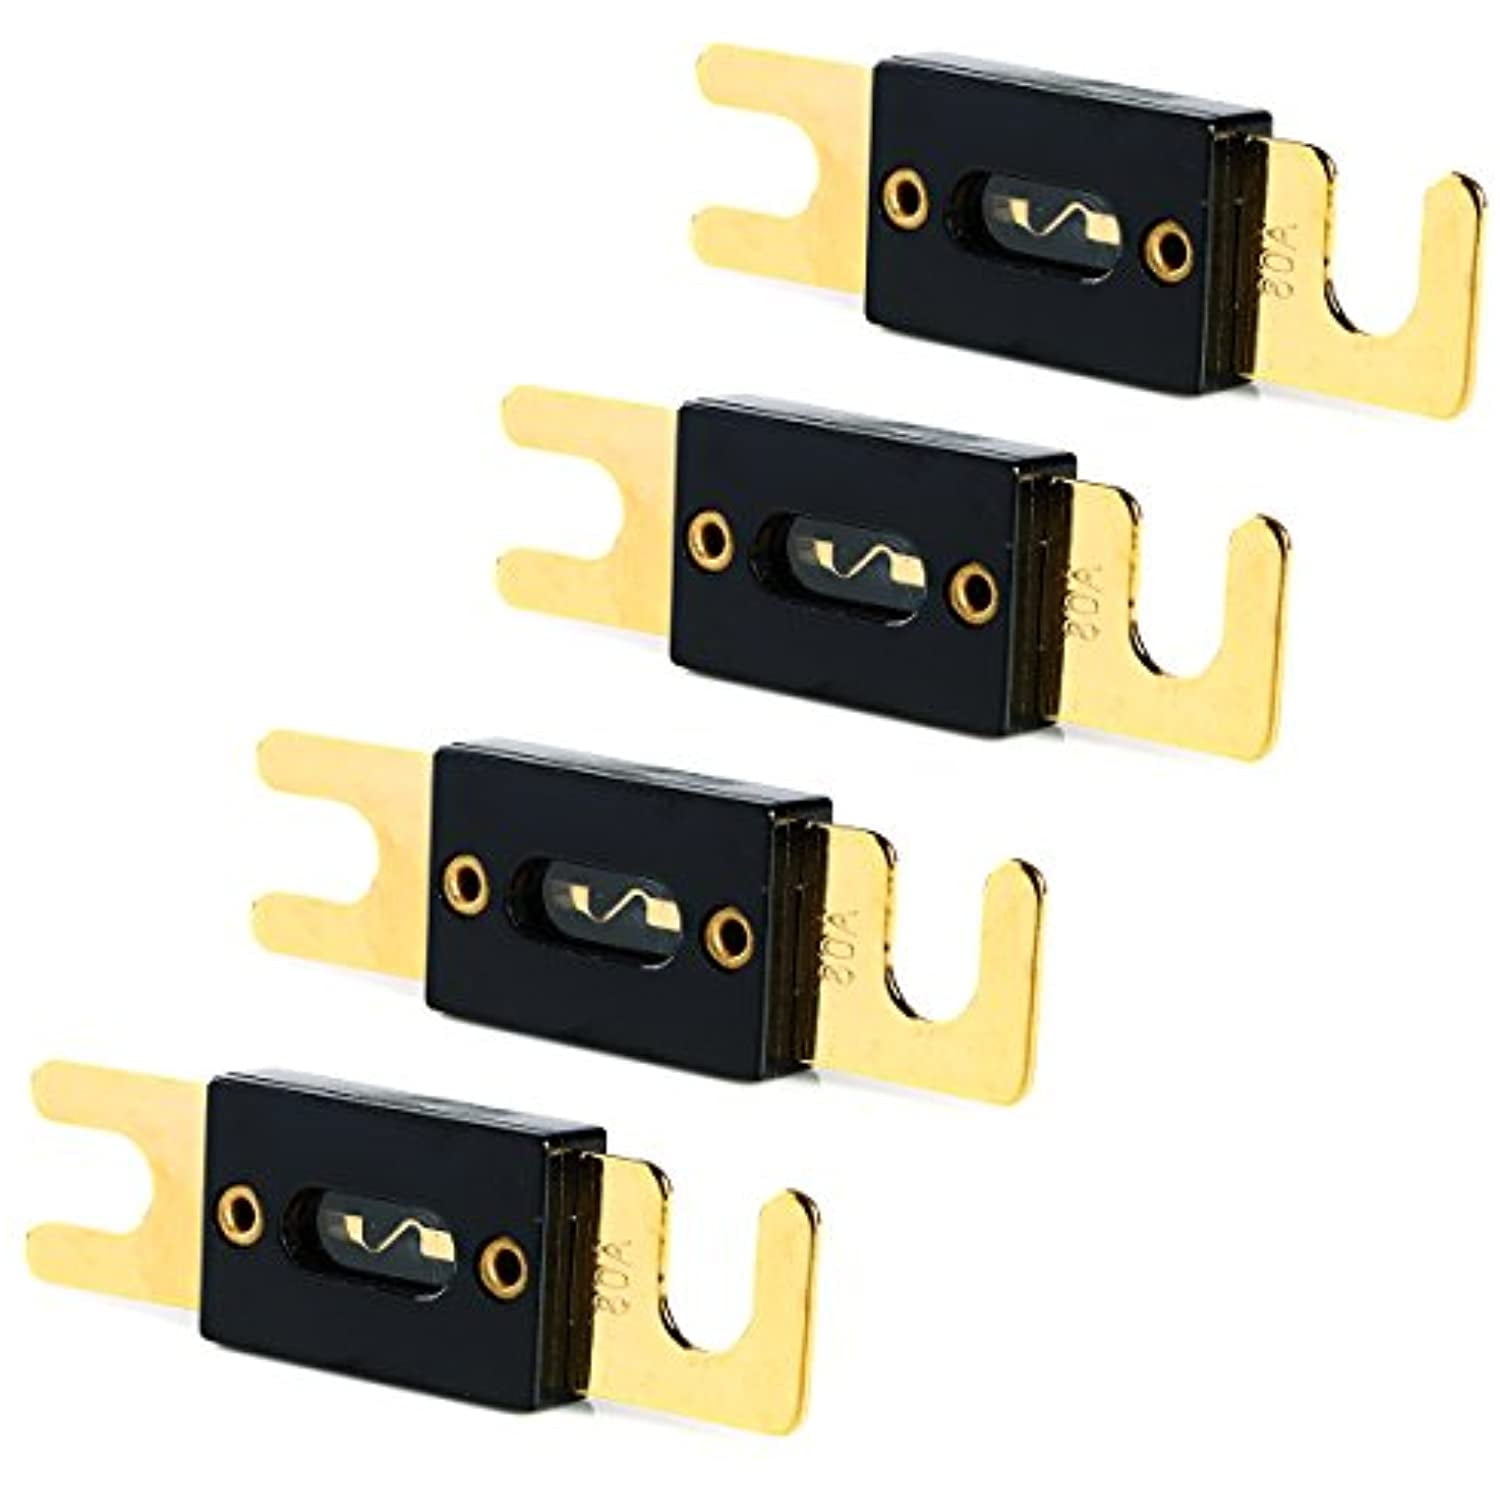 4 Pack ANL fuse For Autocar Vehicles Audio System Gold Plated 250 AMP 